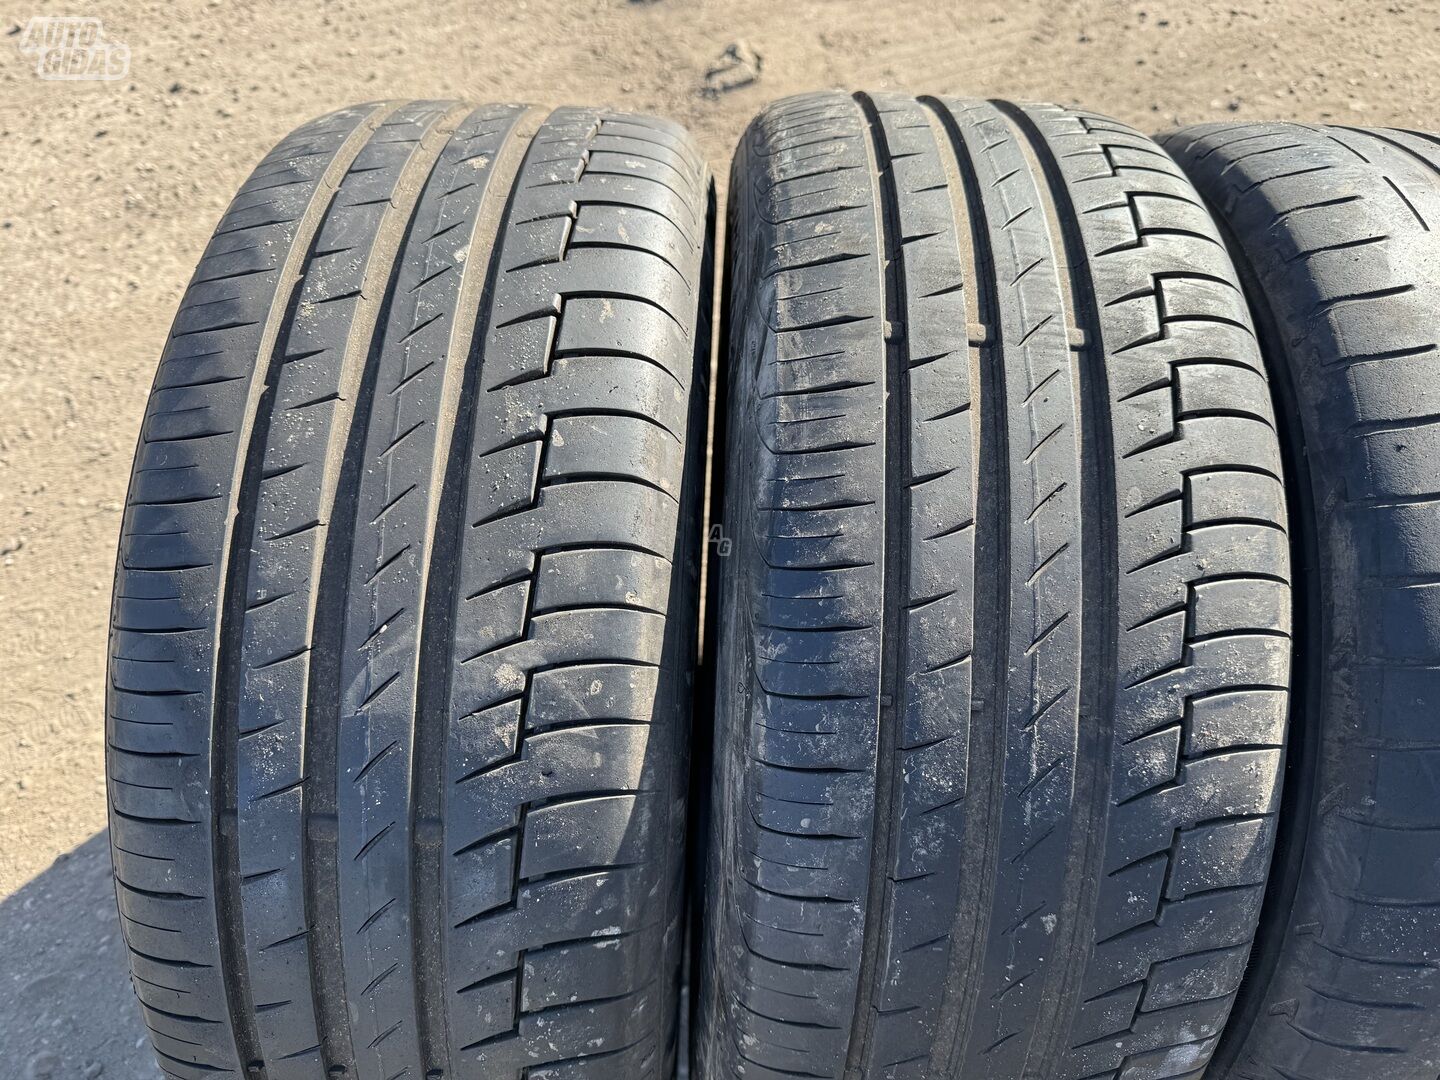 Continental Siunciam, 7mm 2020m R18 summer tyres passanger car